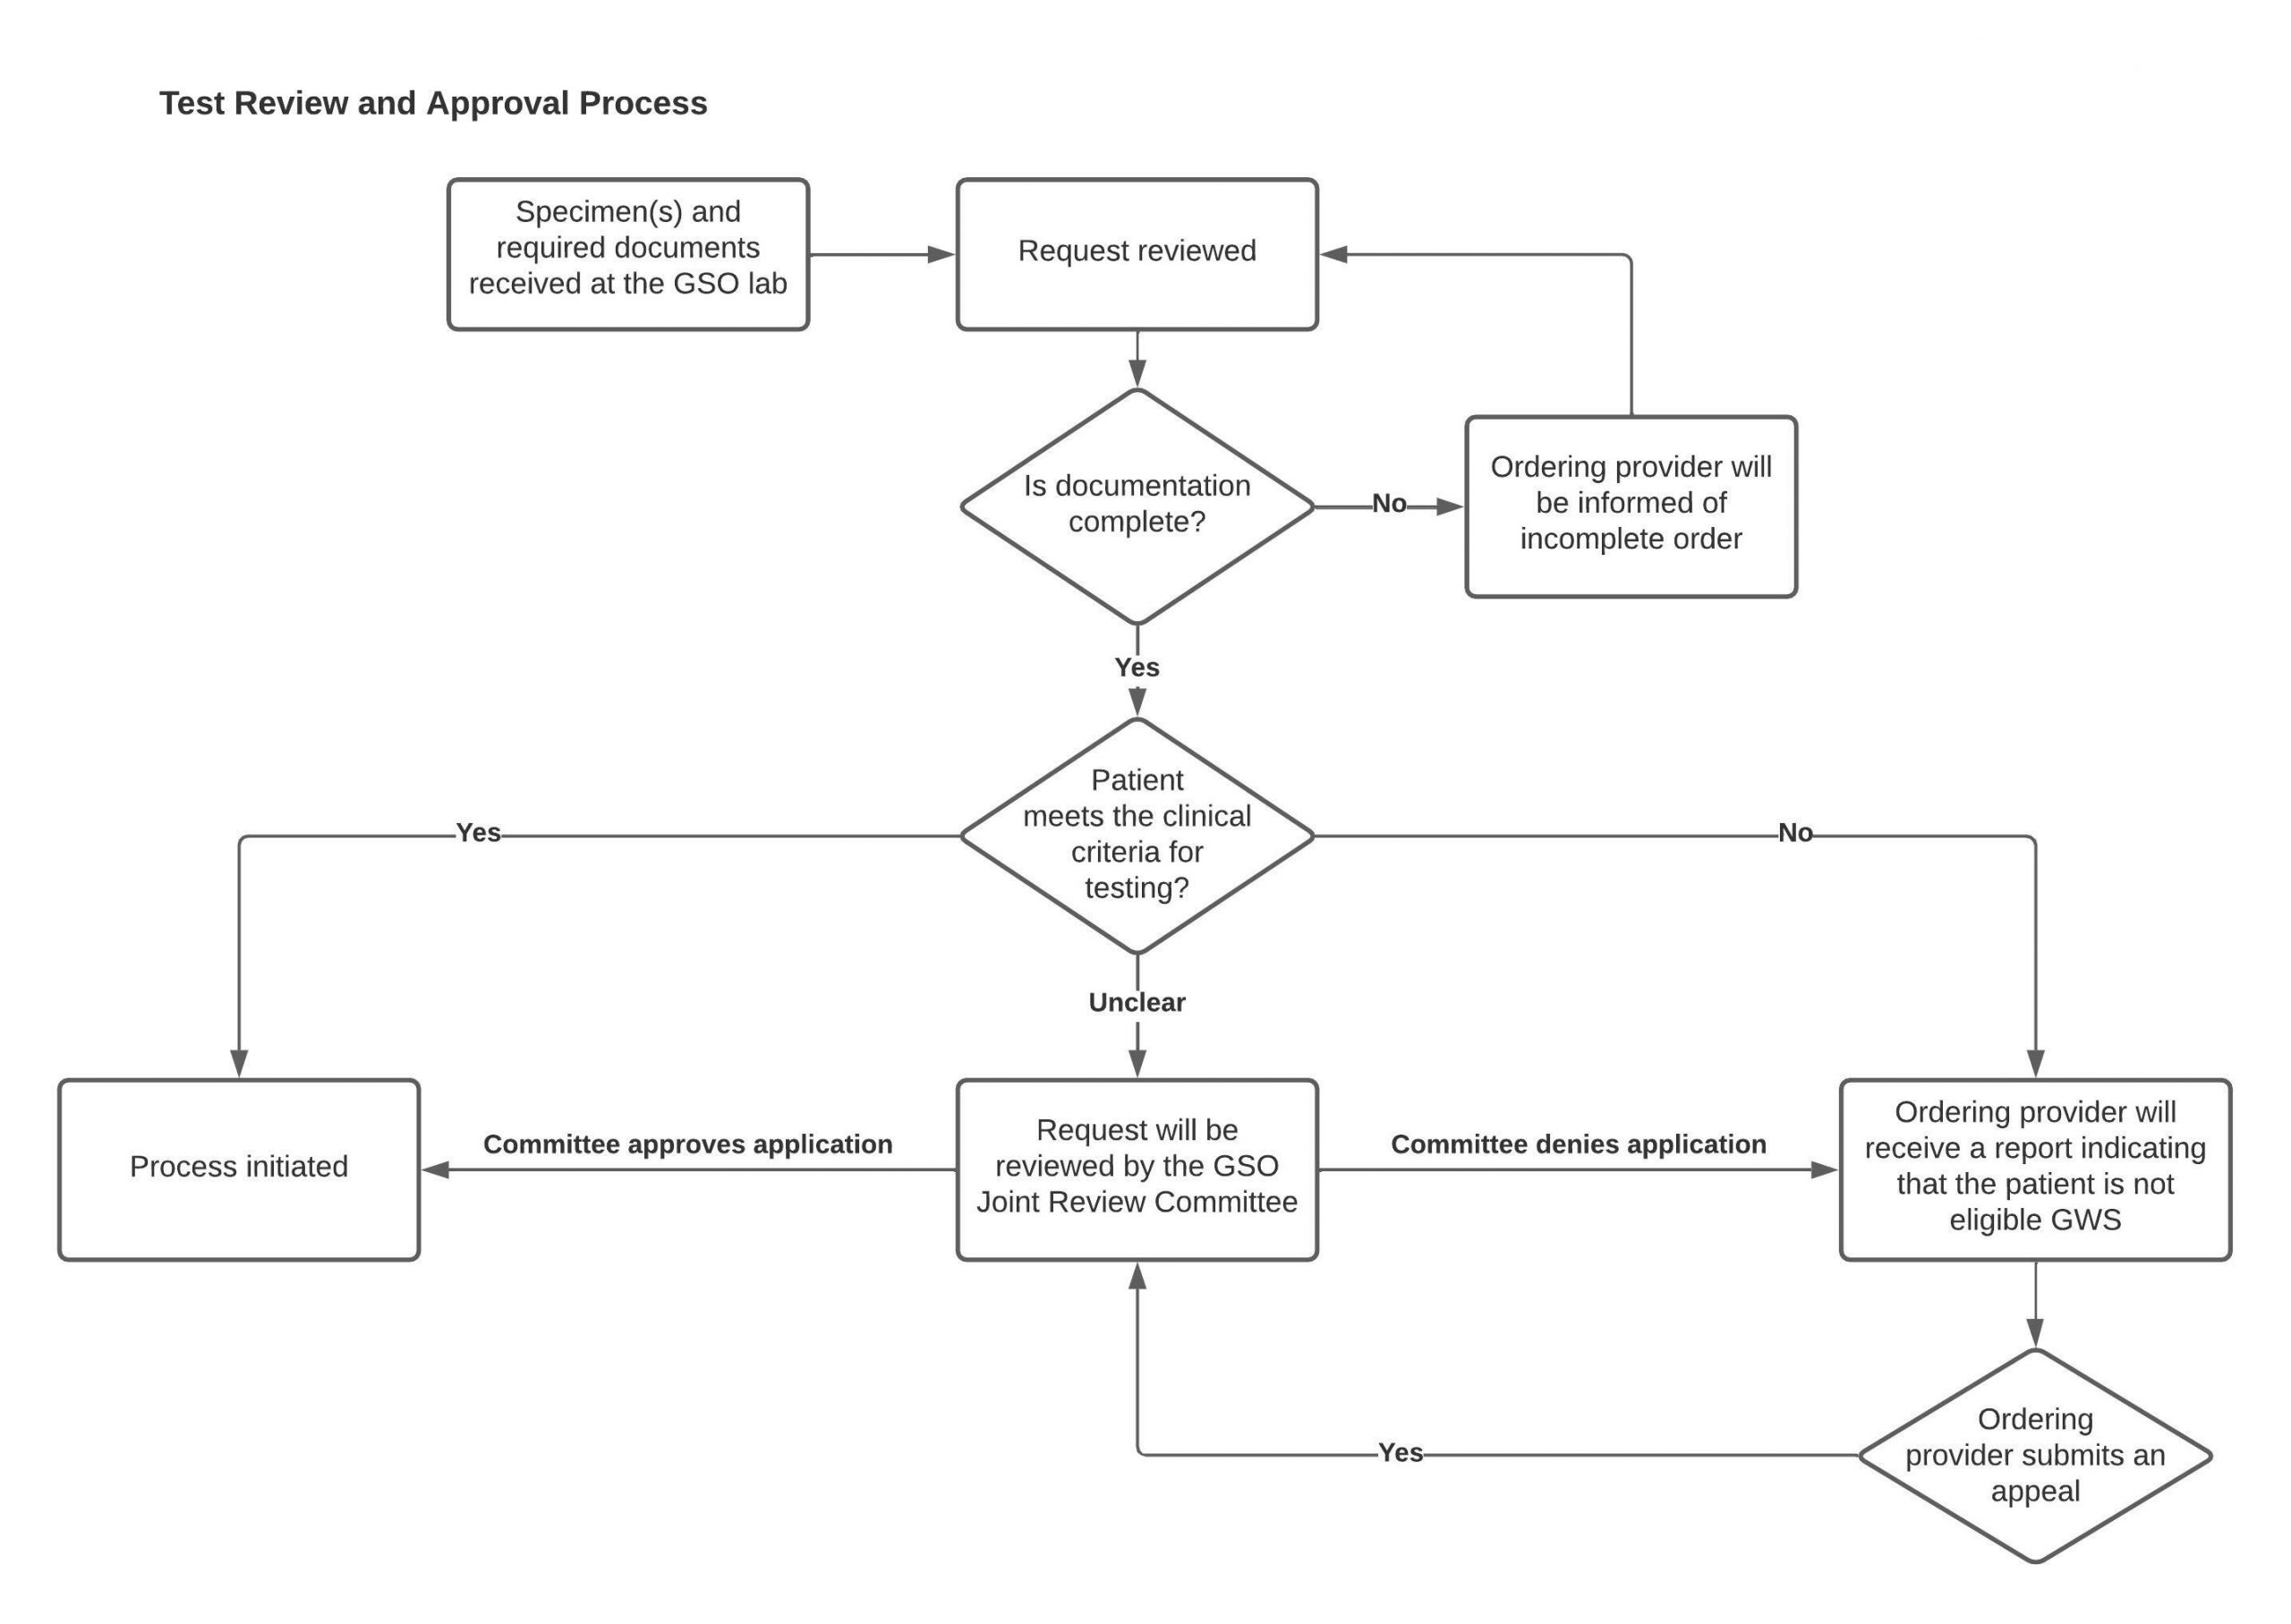 GSO Test Approval Process with text description below